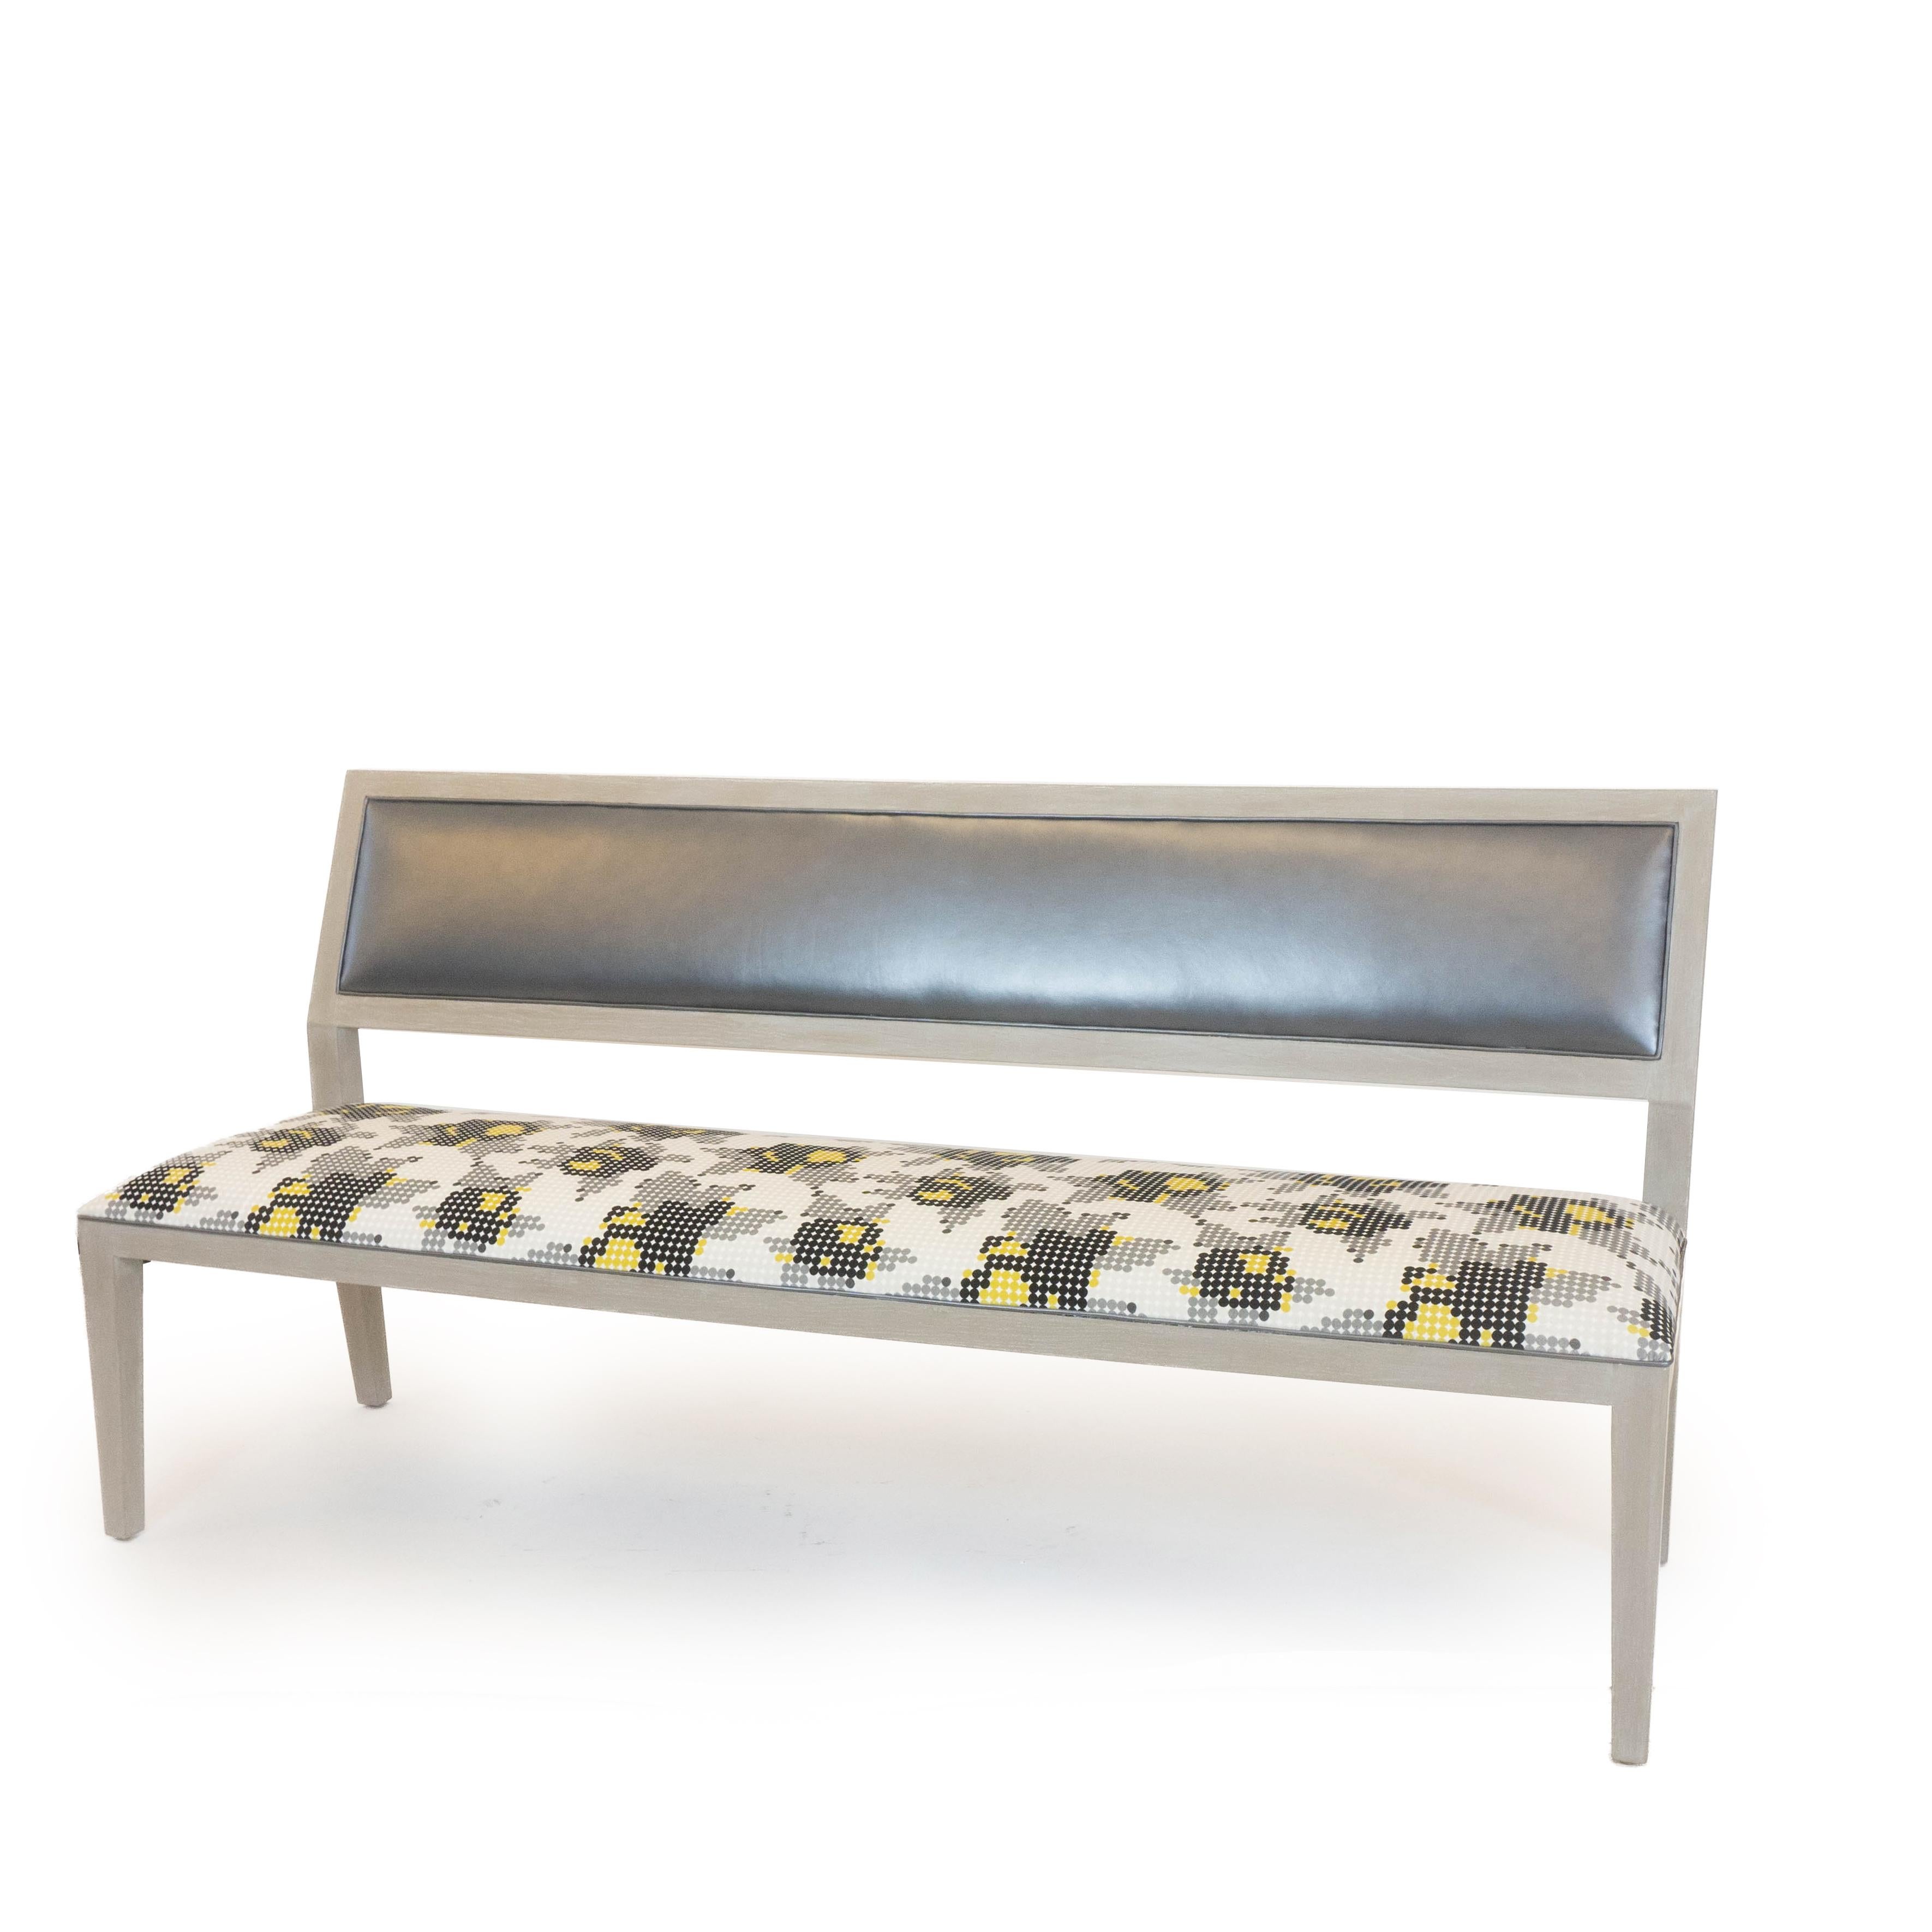 armless bench with back